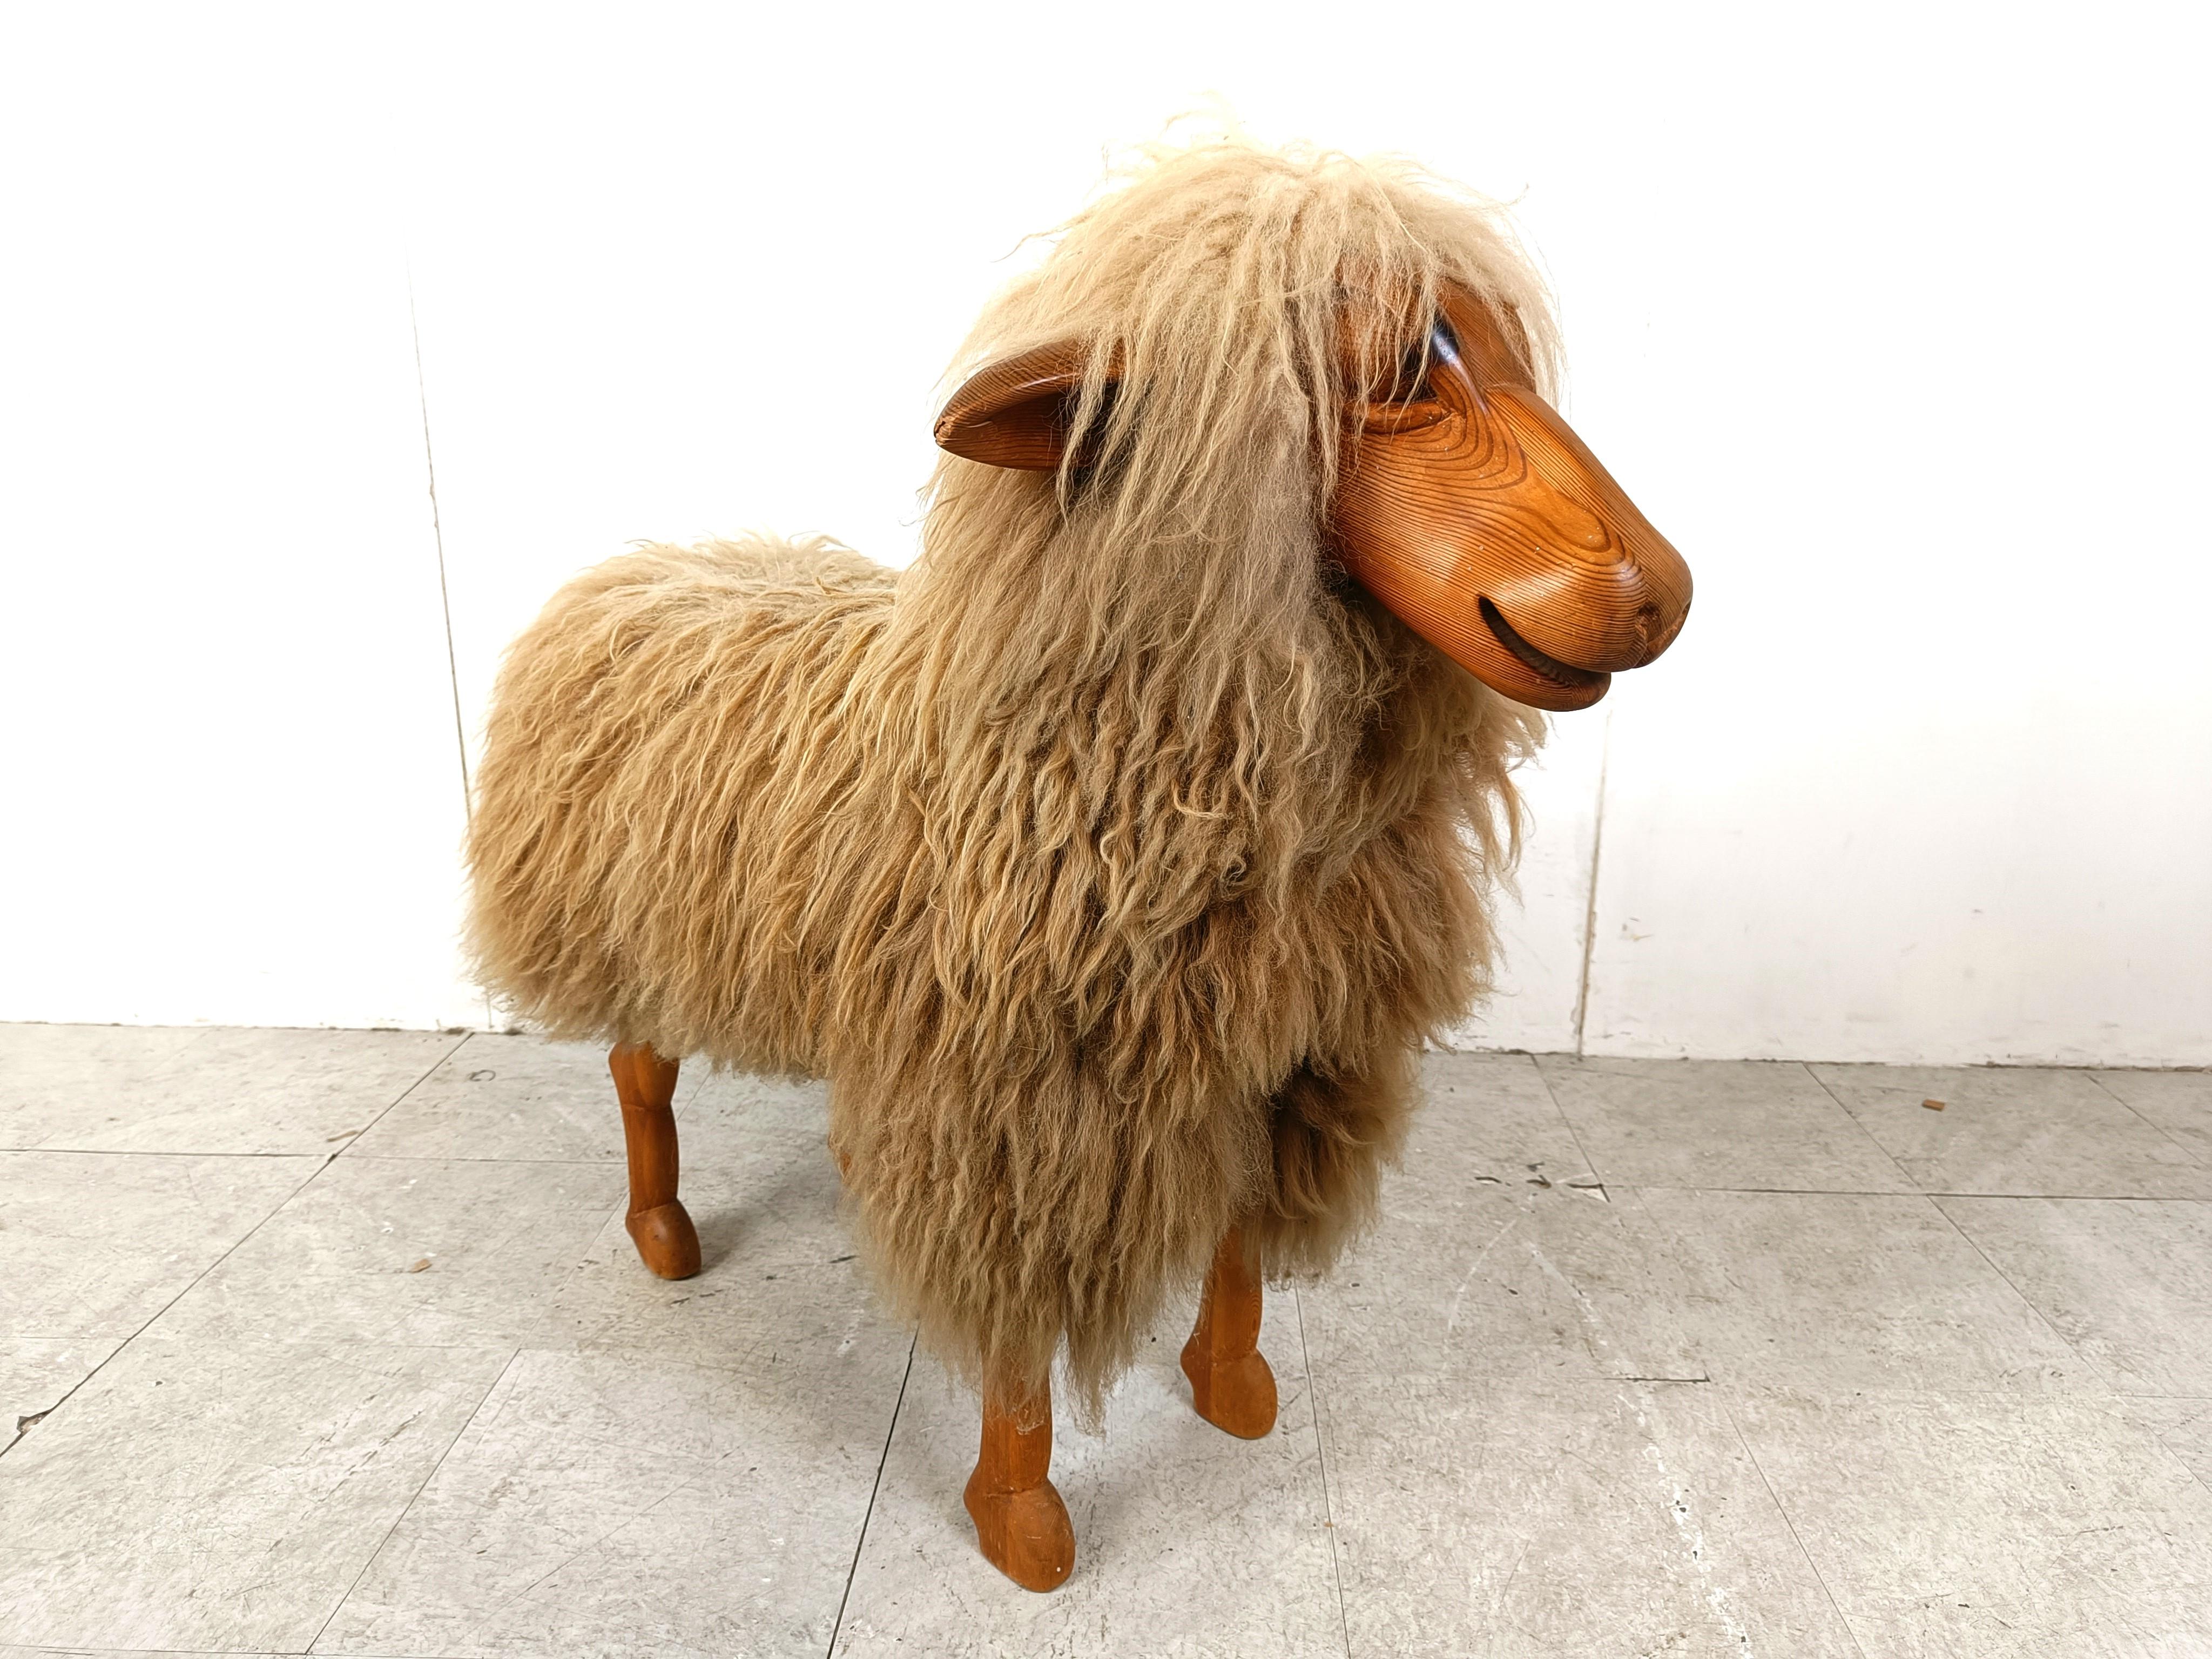 
Impressive mid century life size sheep stool.

Made from beech wood and real wool.

A very decorative item.

One ear has had a slight damage, other then that its in good condition

1970s - Germany

Height: 85cm
Width: 100cm
Depth: 45cm
Seat height: